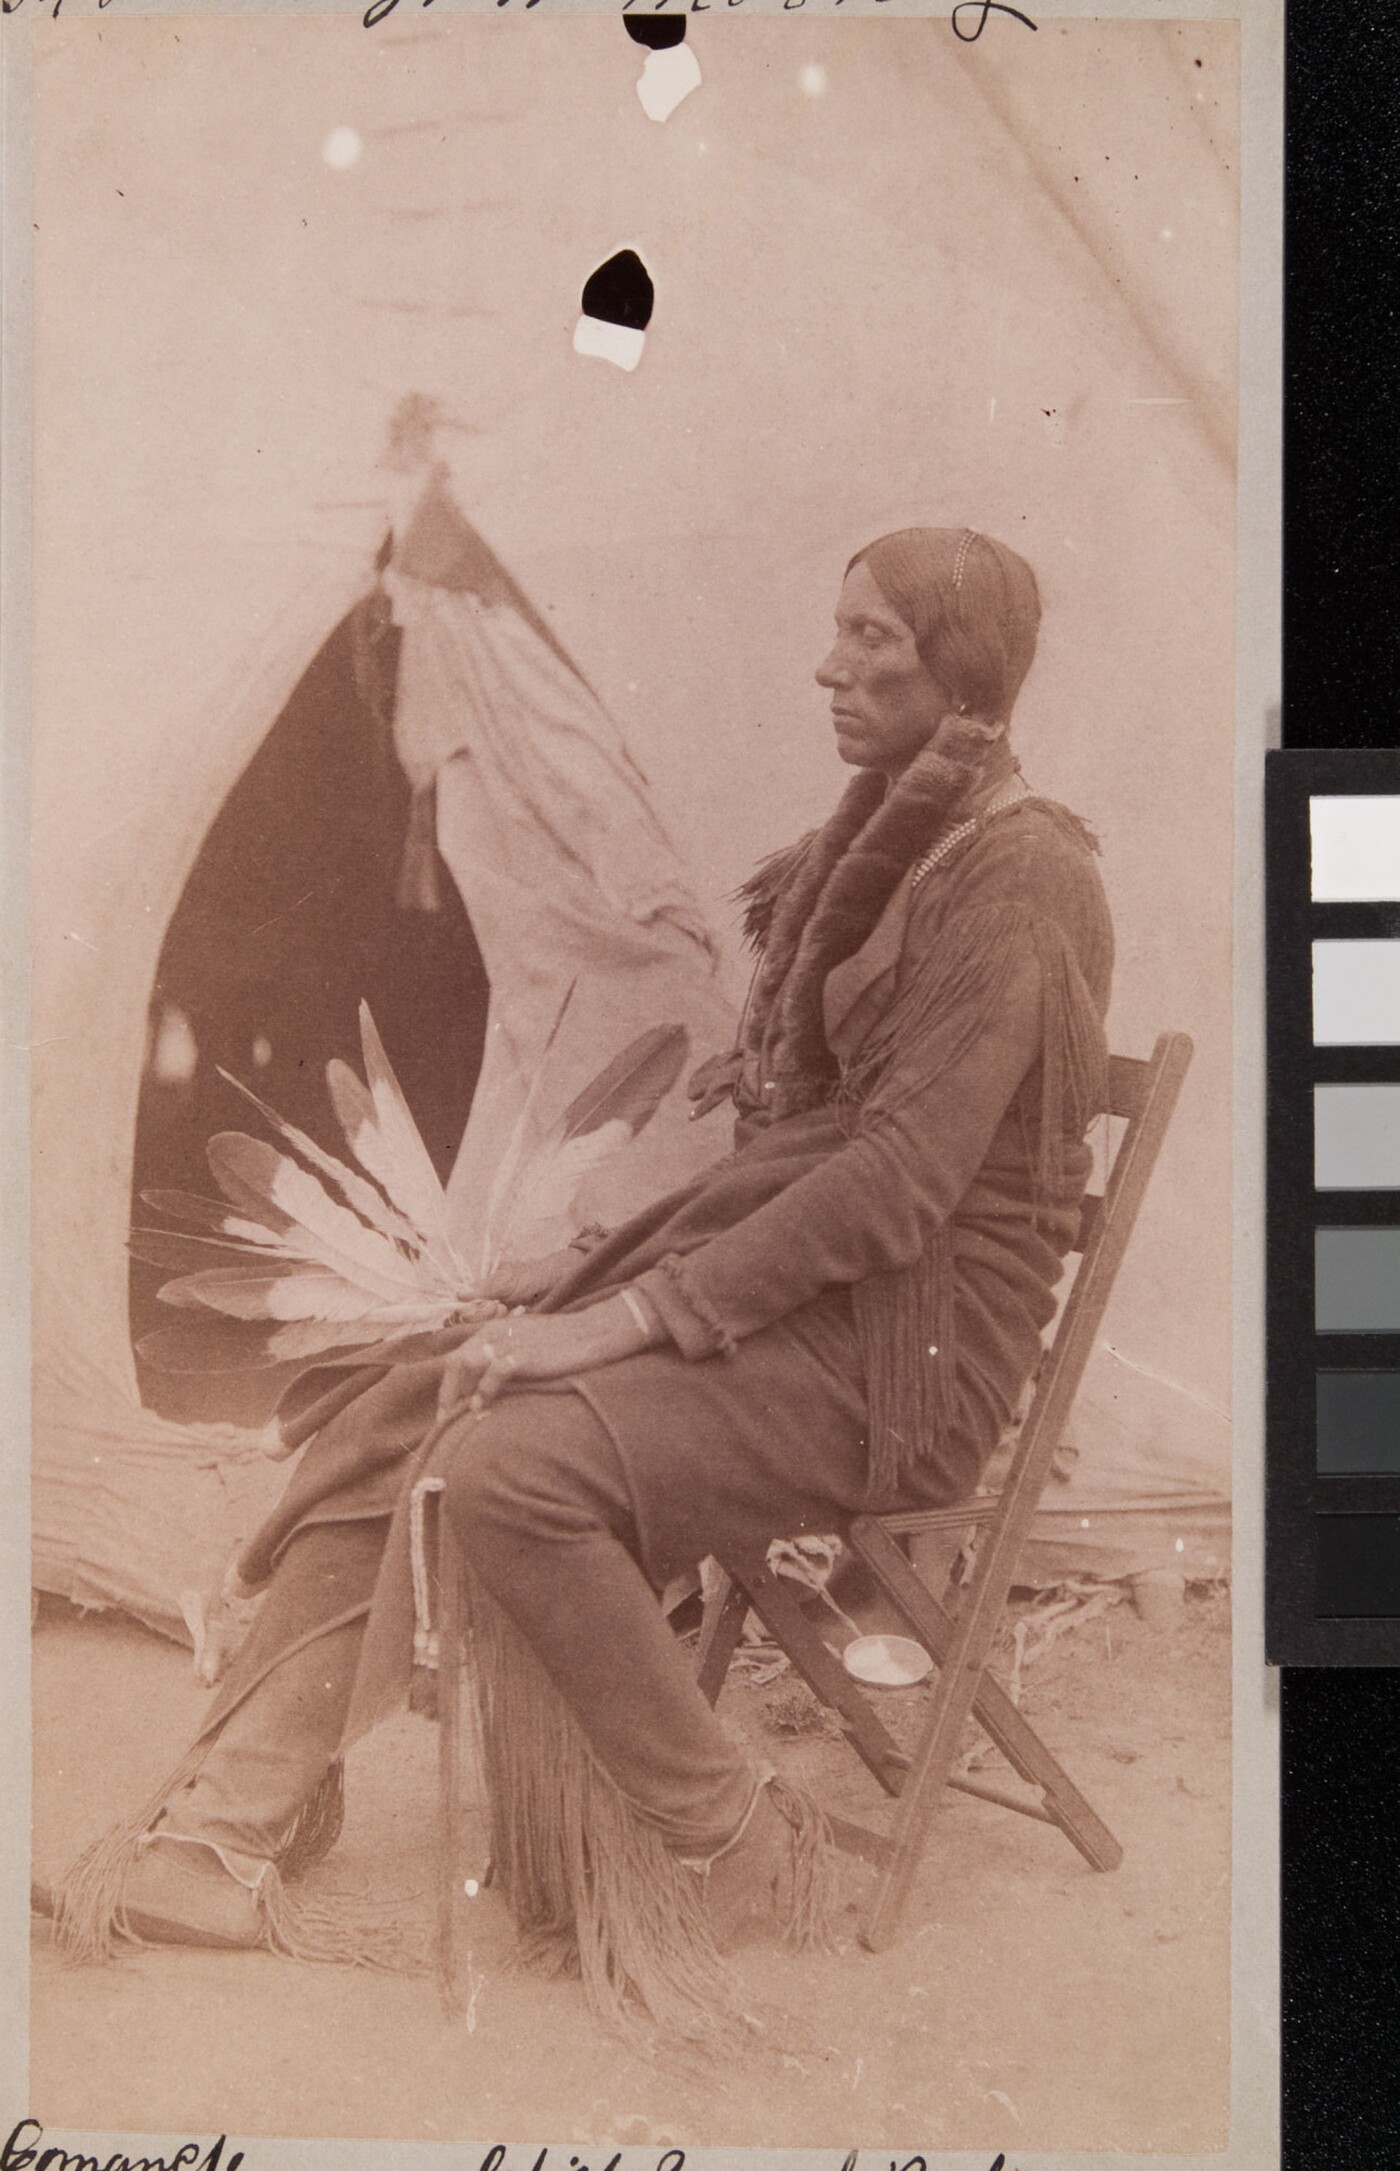 Quanah Parker Son Of Fragrant Parker In Native Dress With Breastplate